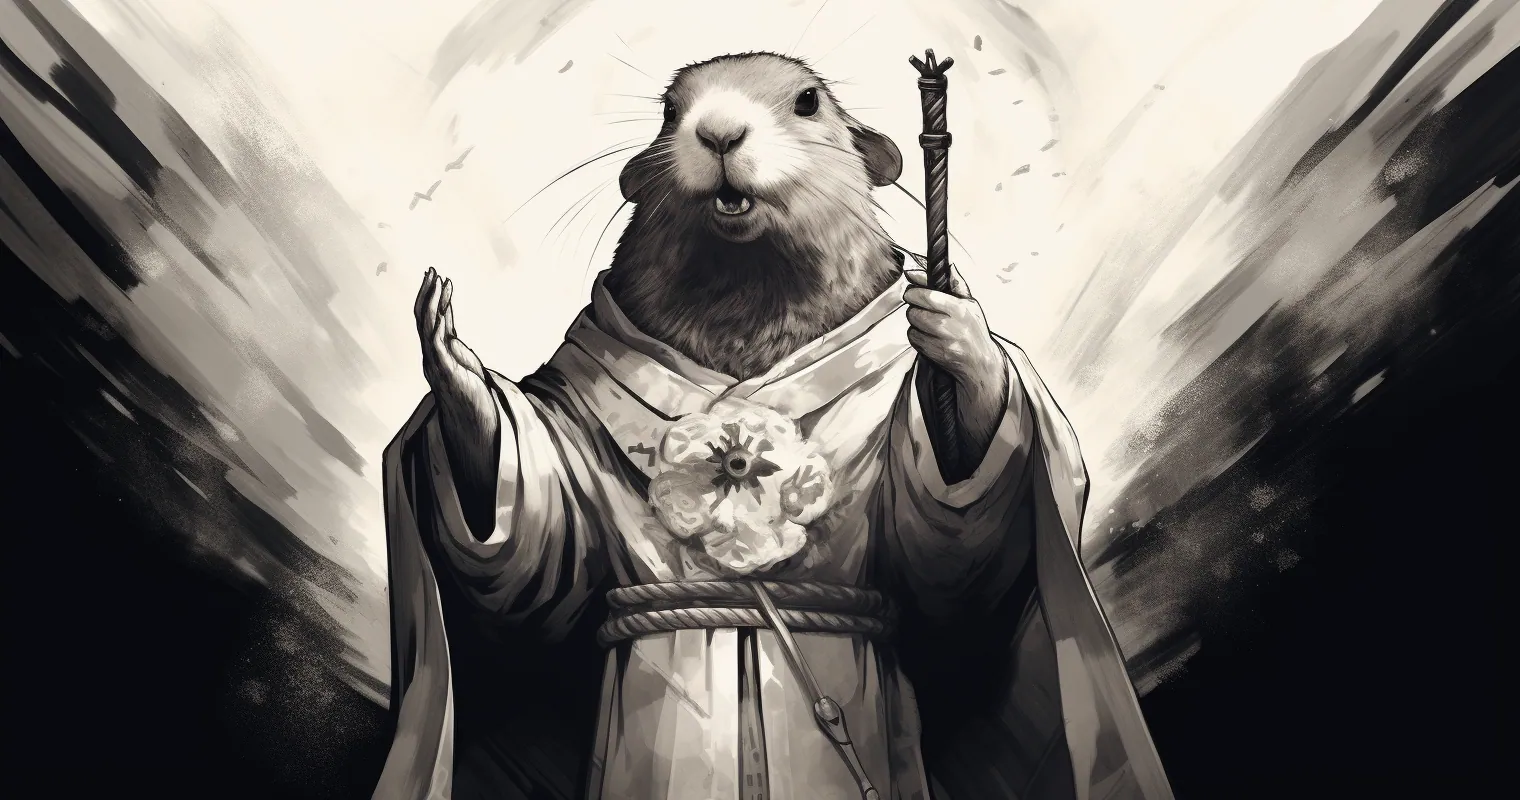 A gopher in priest's robes radiating light